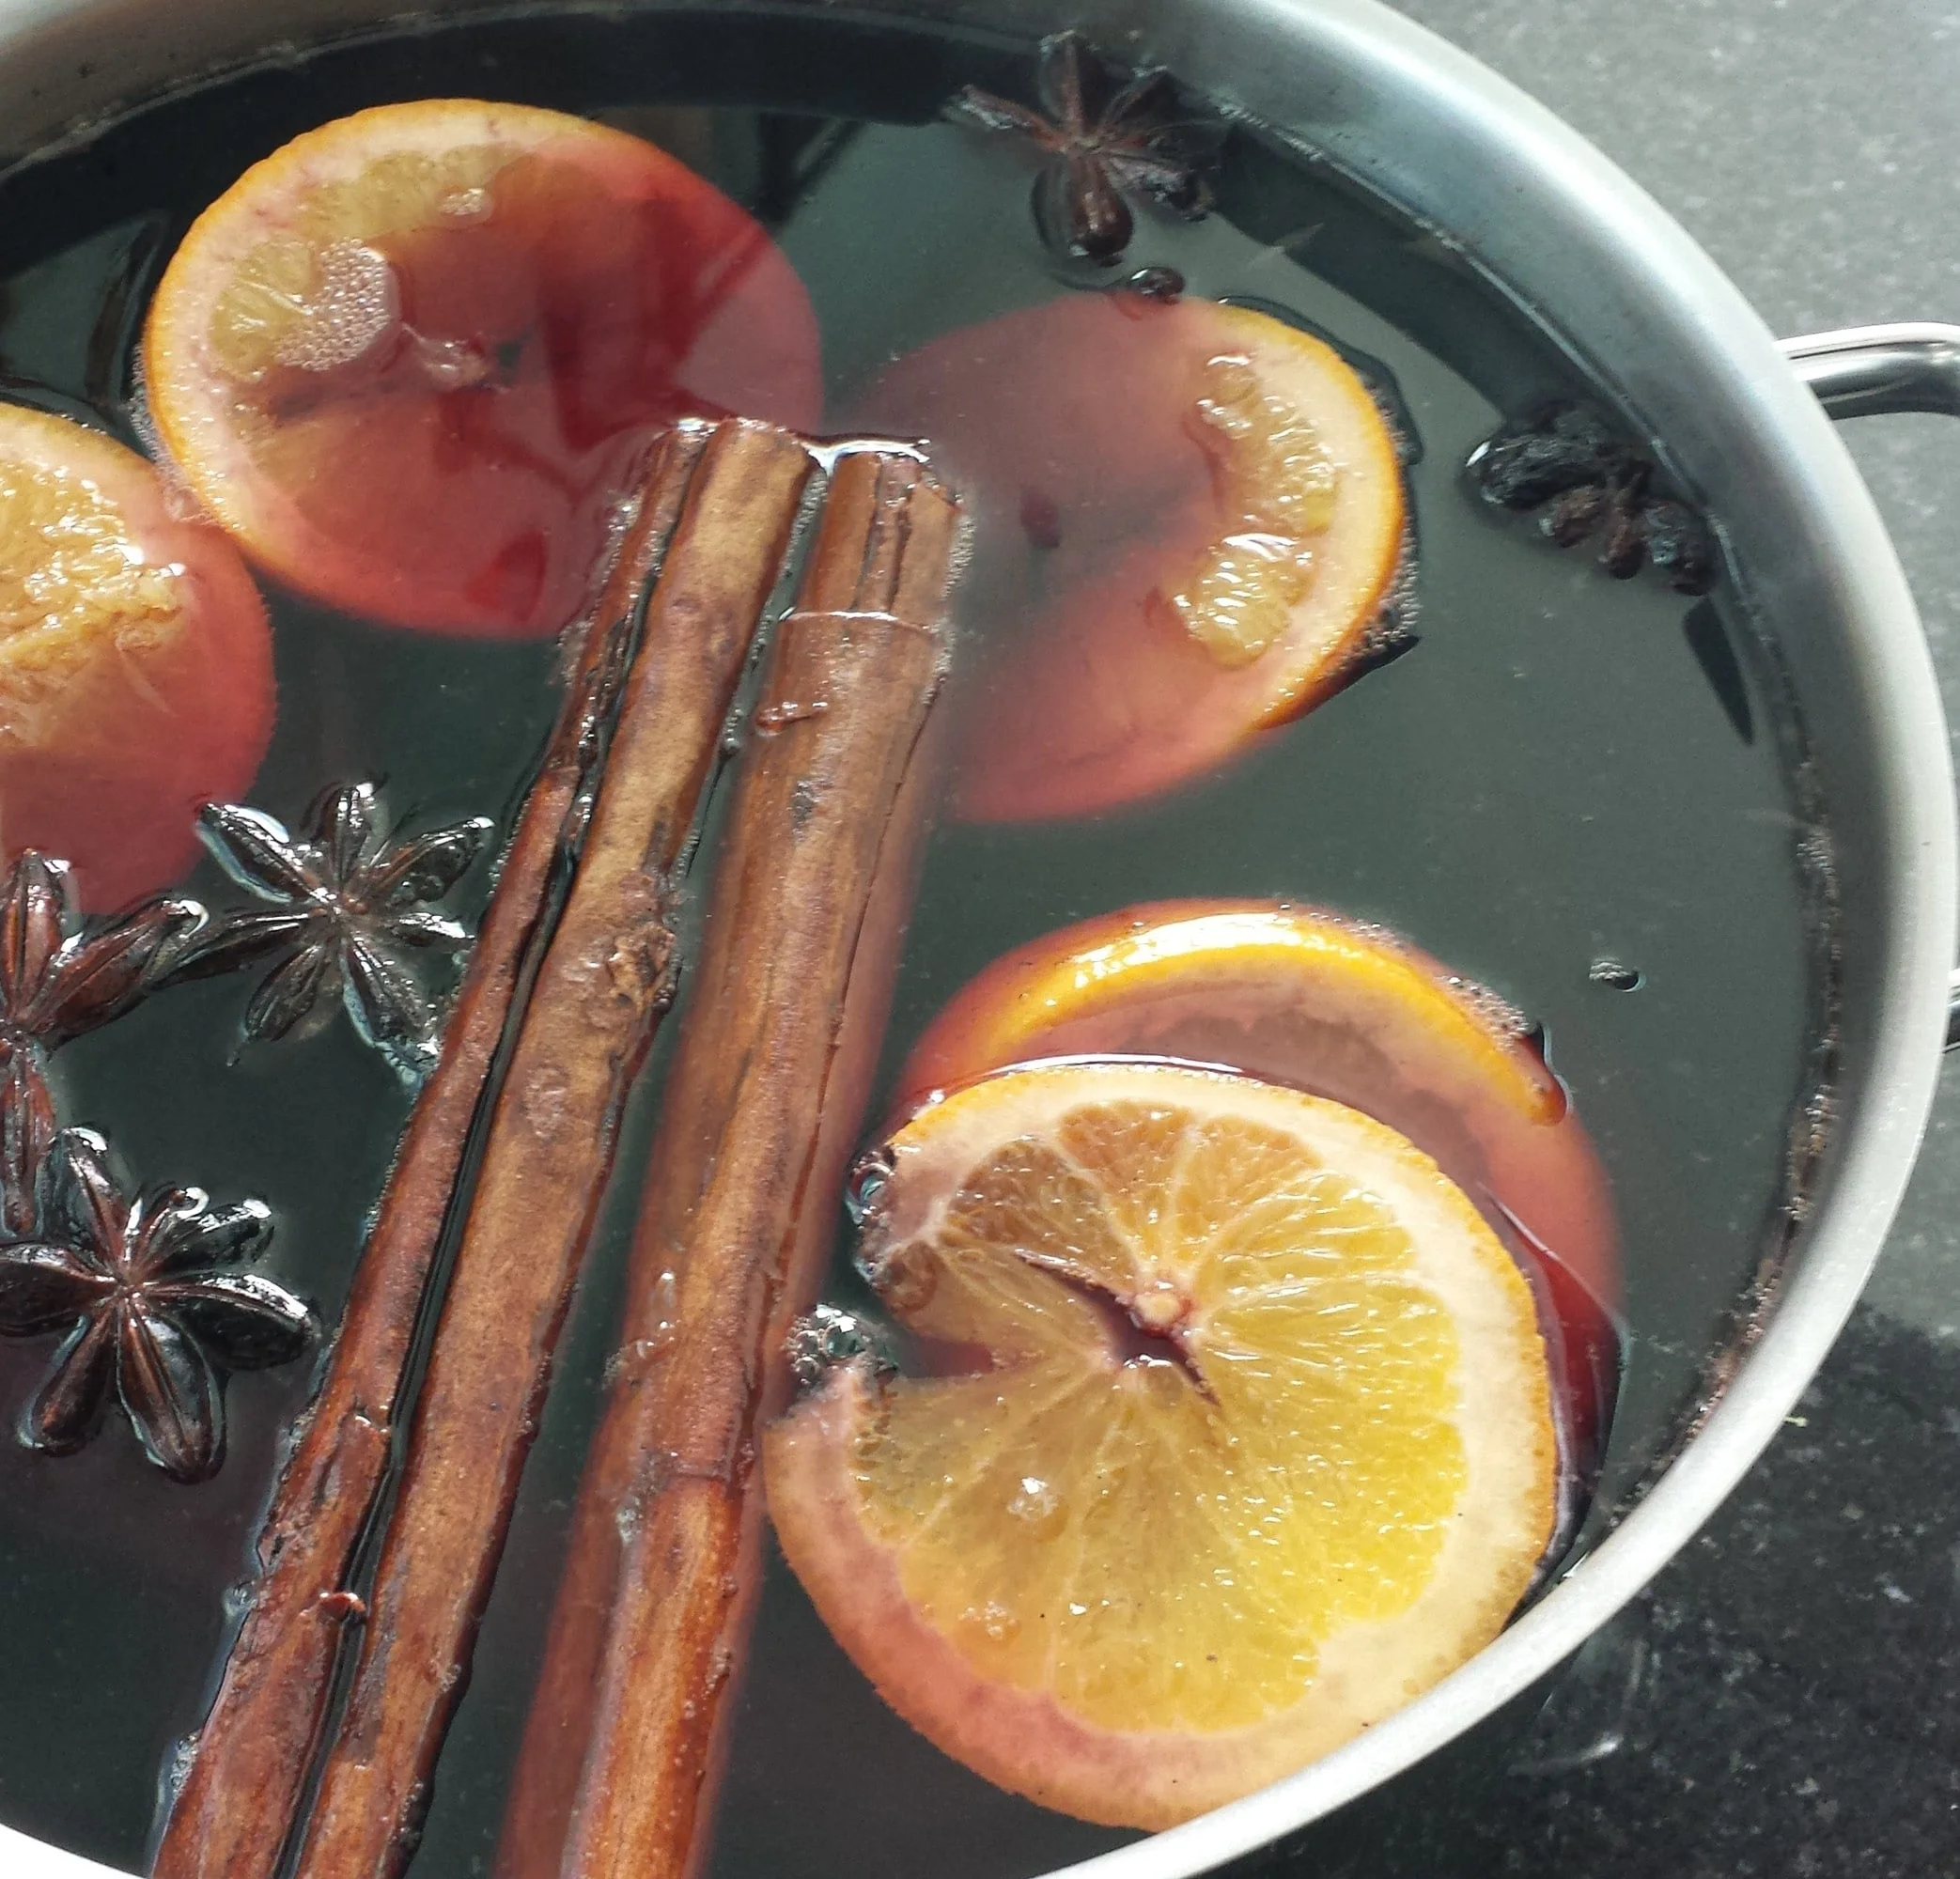 Mulled Wine with Spices